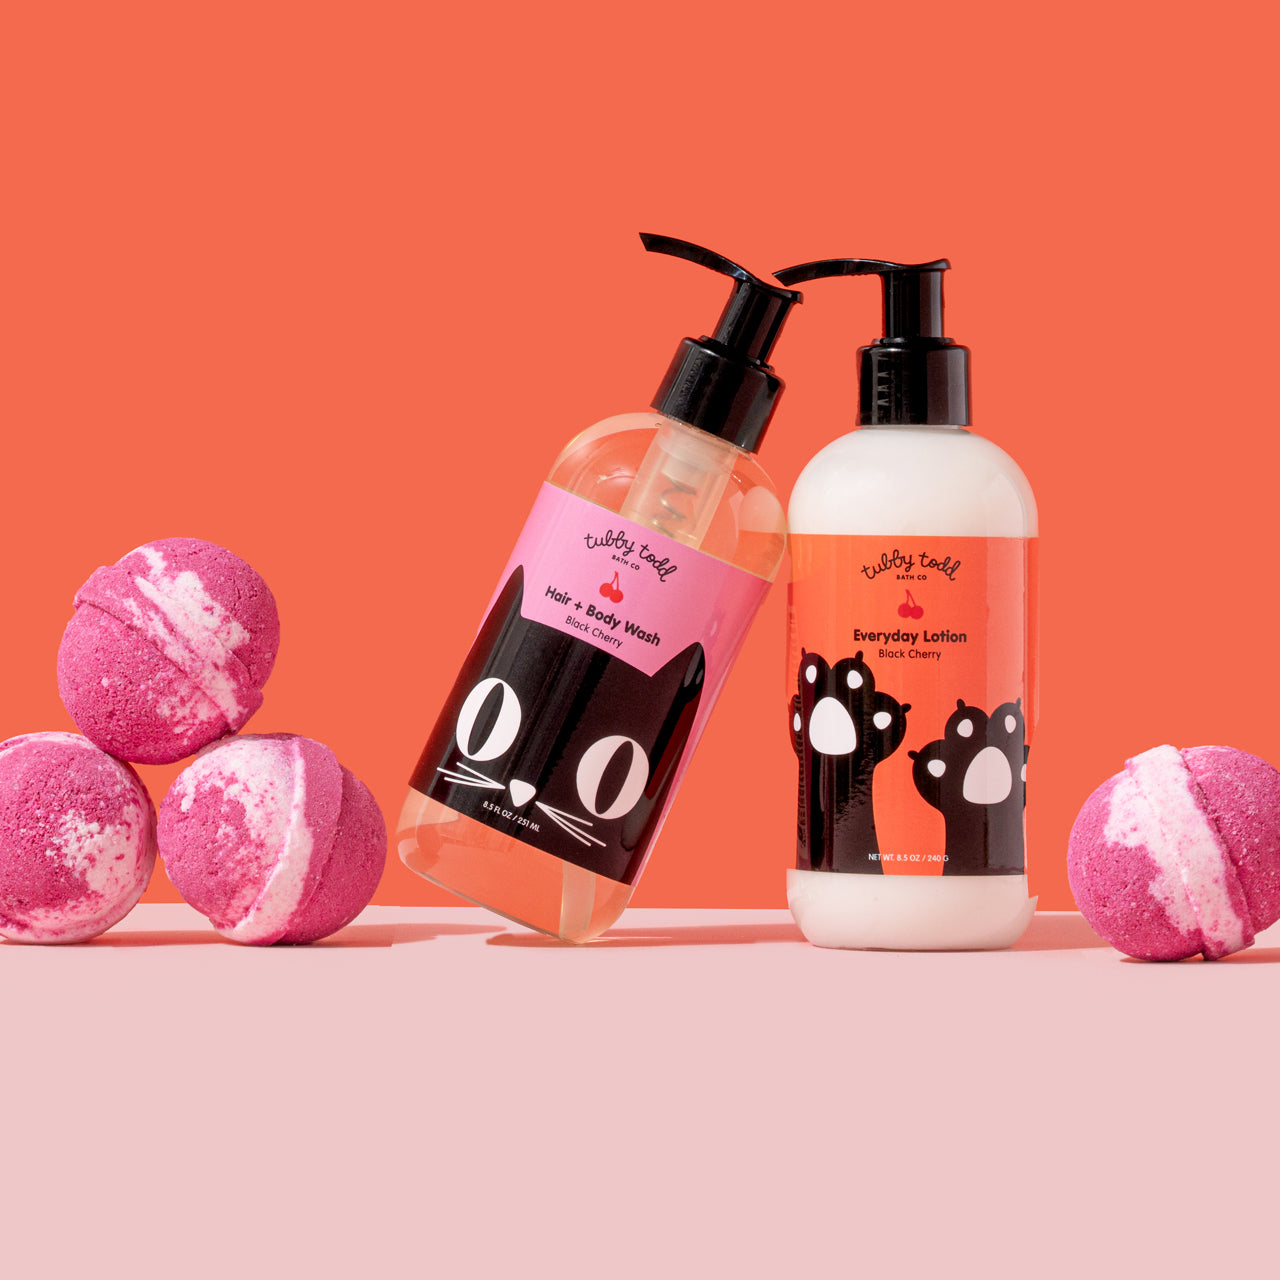 Halloween Bundle with bath bombs on red and pink background